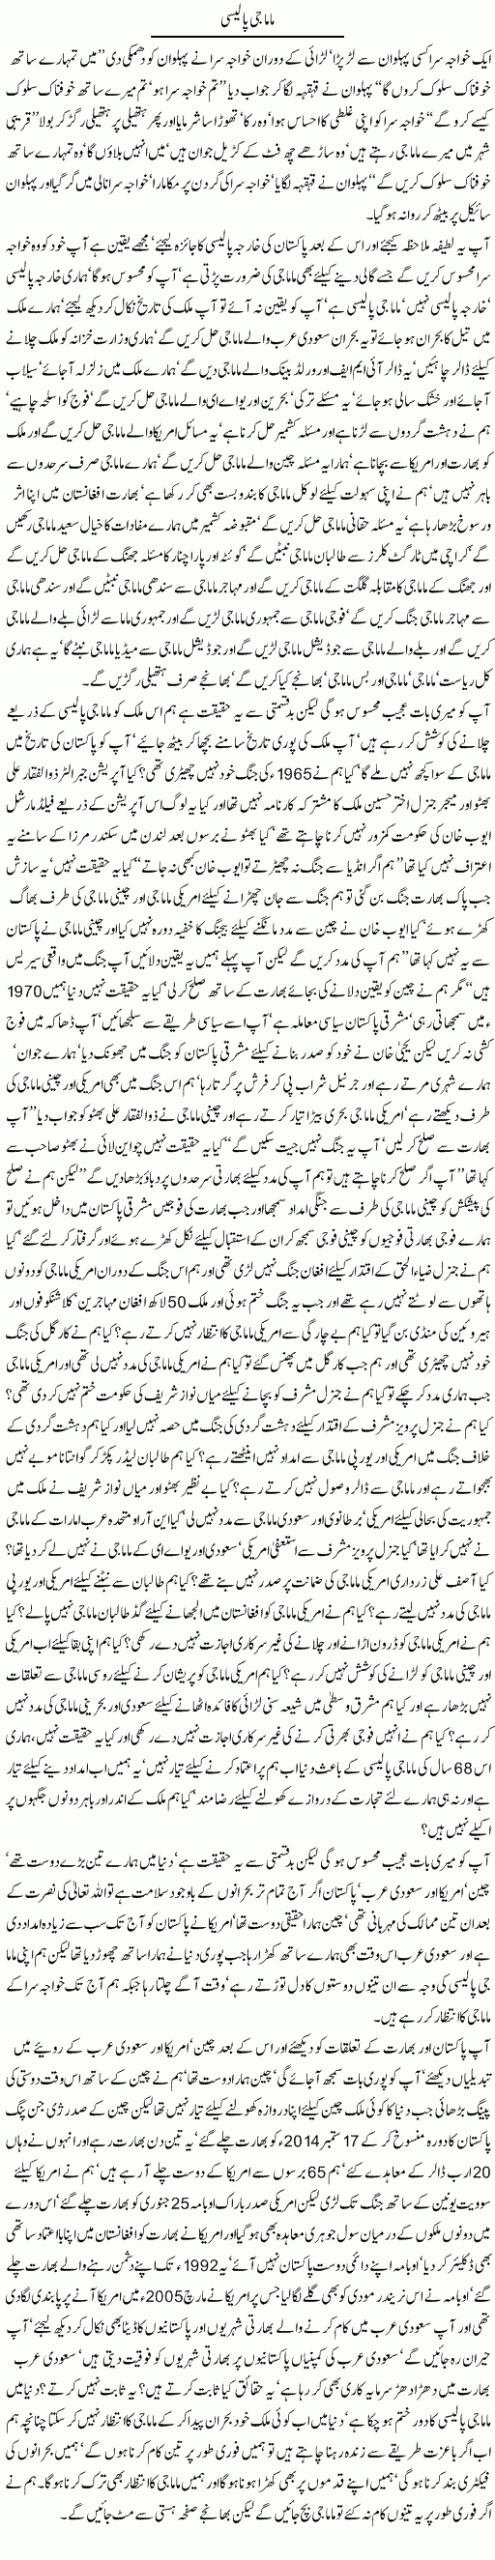 Javed Chaudhry Mama Jee Article